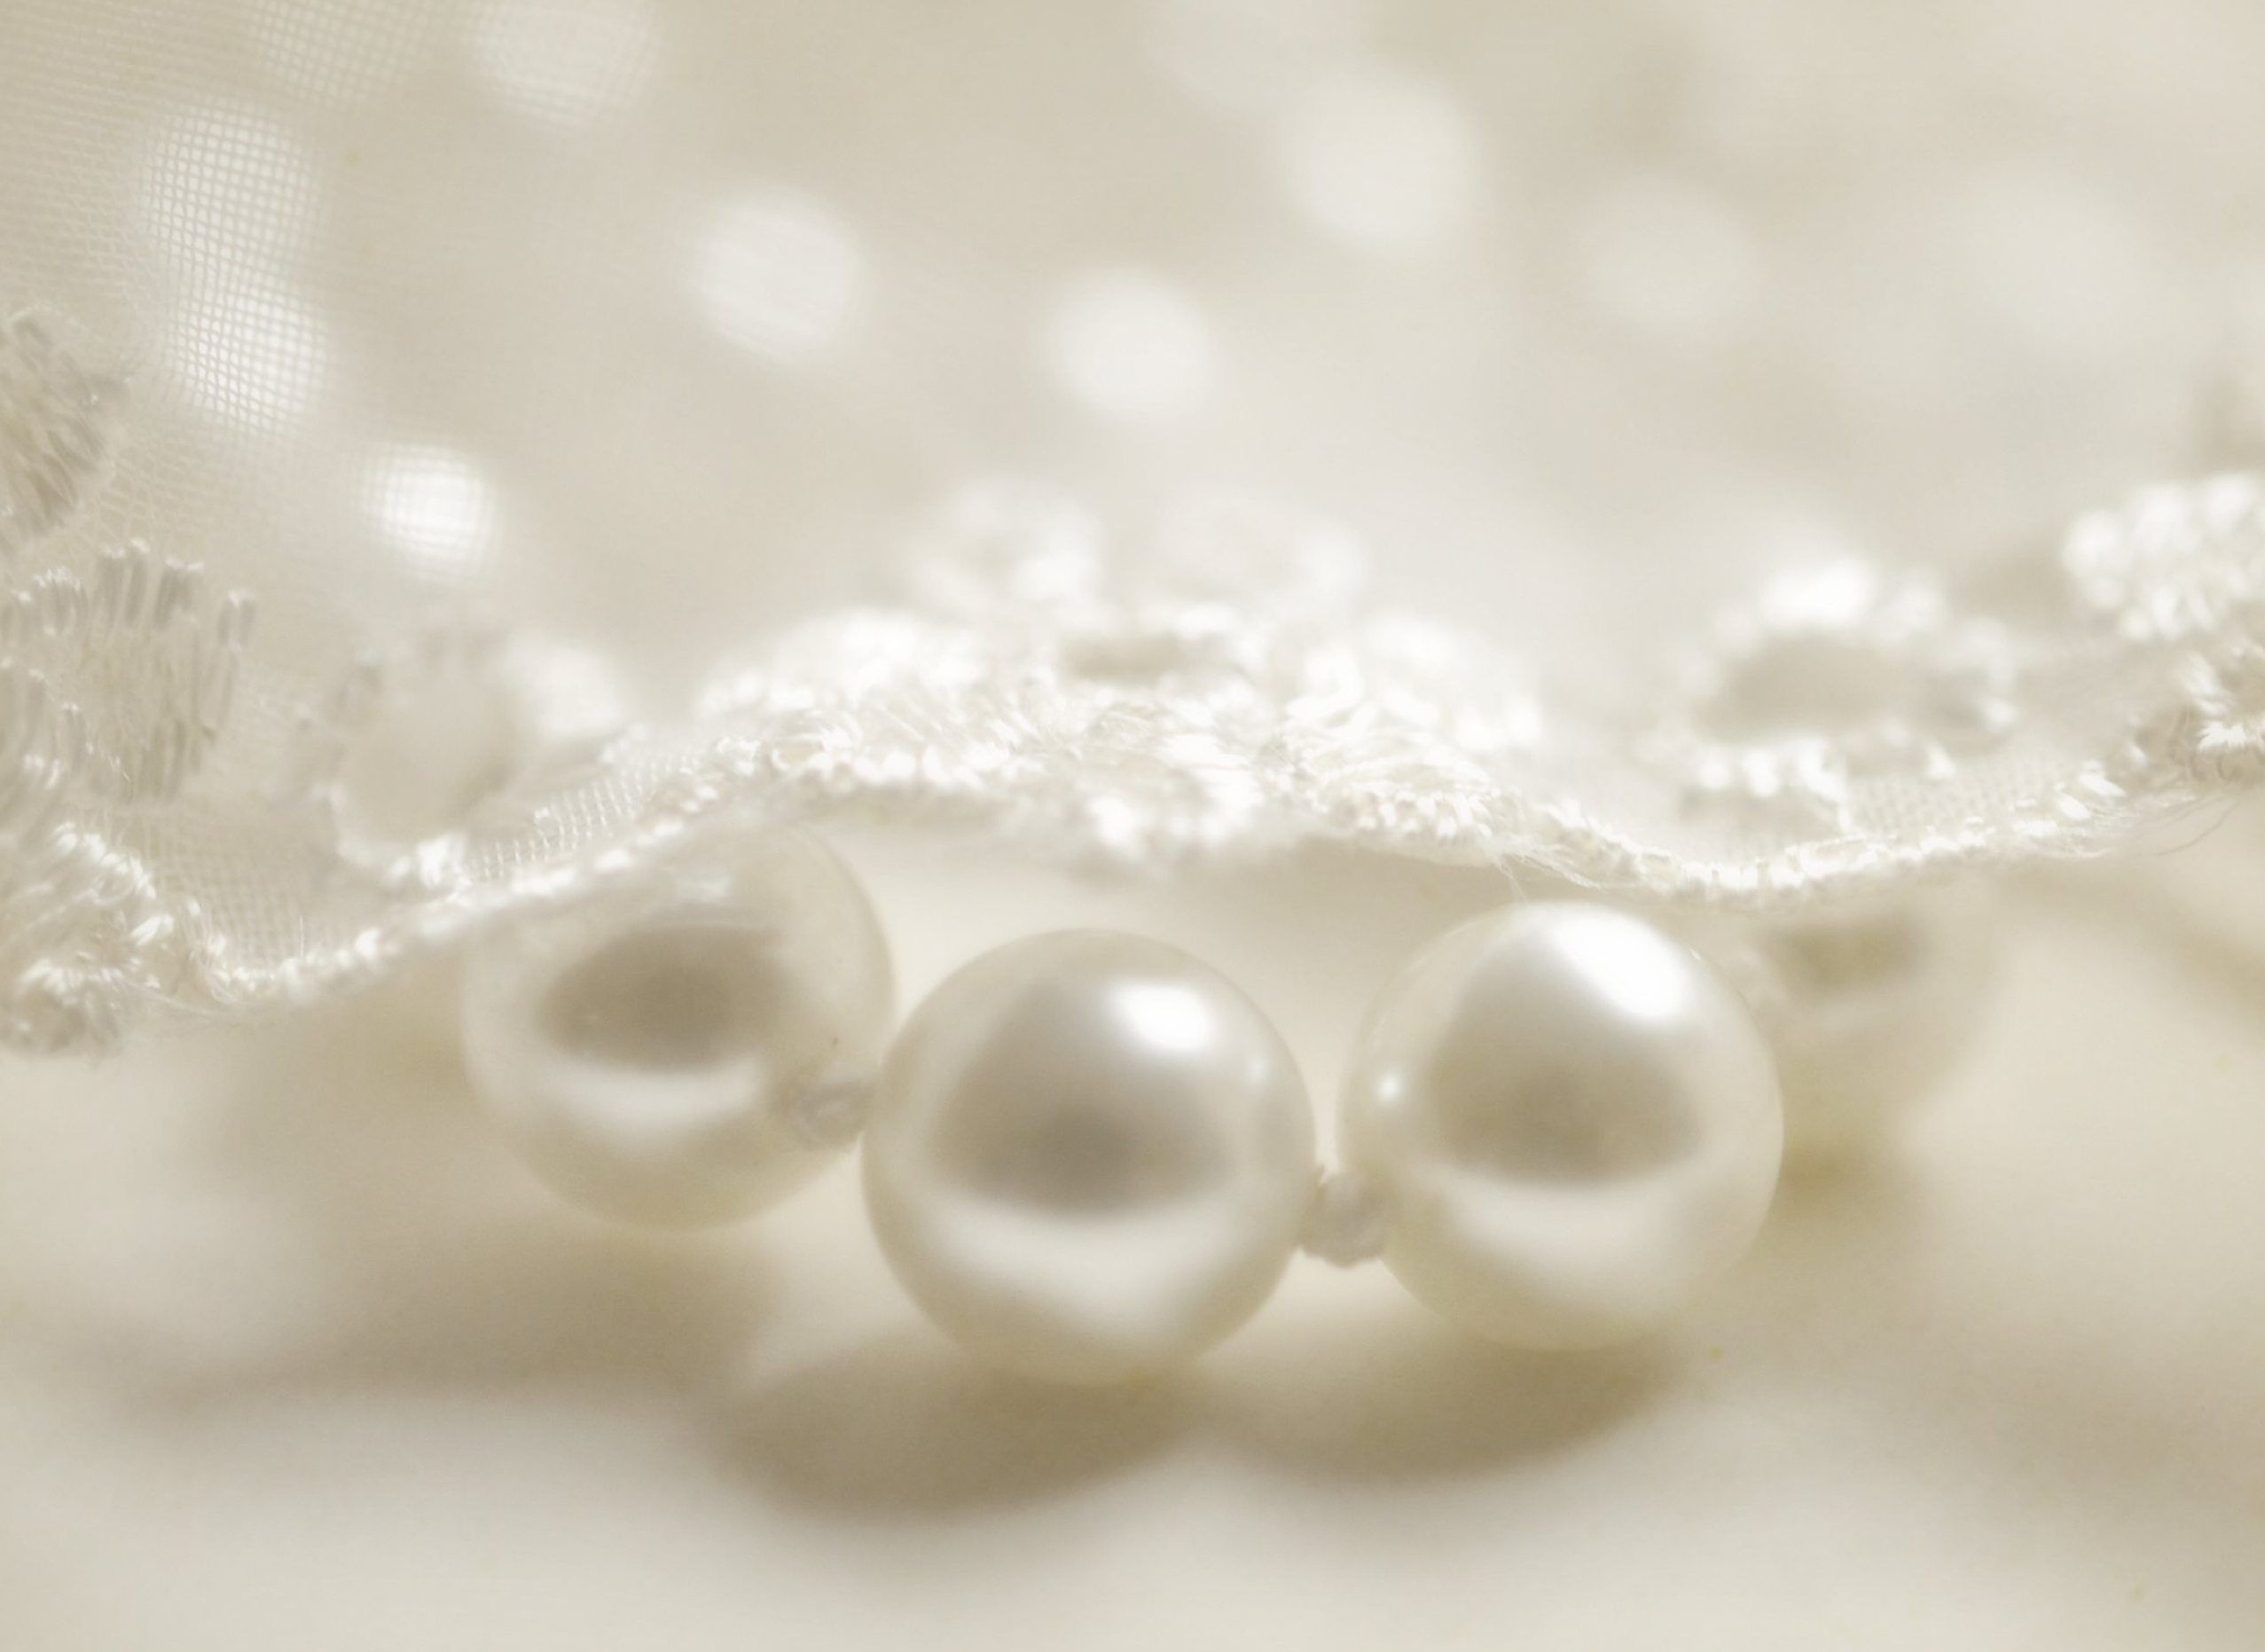 2554x1863 Wallpaper : necklace, beige, bokeh, lace, jewelry, overlay, pearls, picnik, textured, layered, softwhite, vintagelace, explored, memoriesbook 1118334 HD Wallpapers